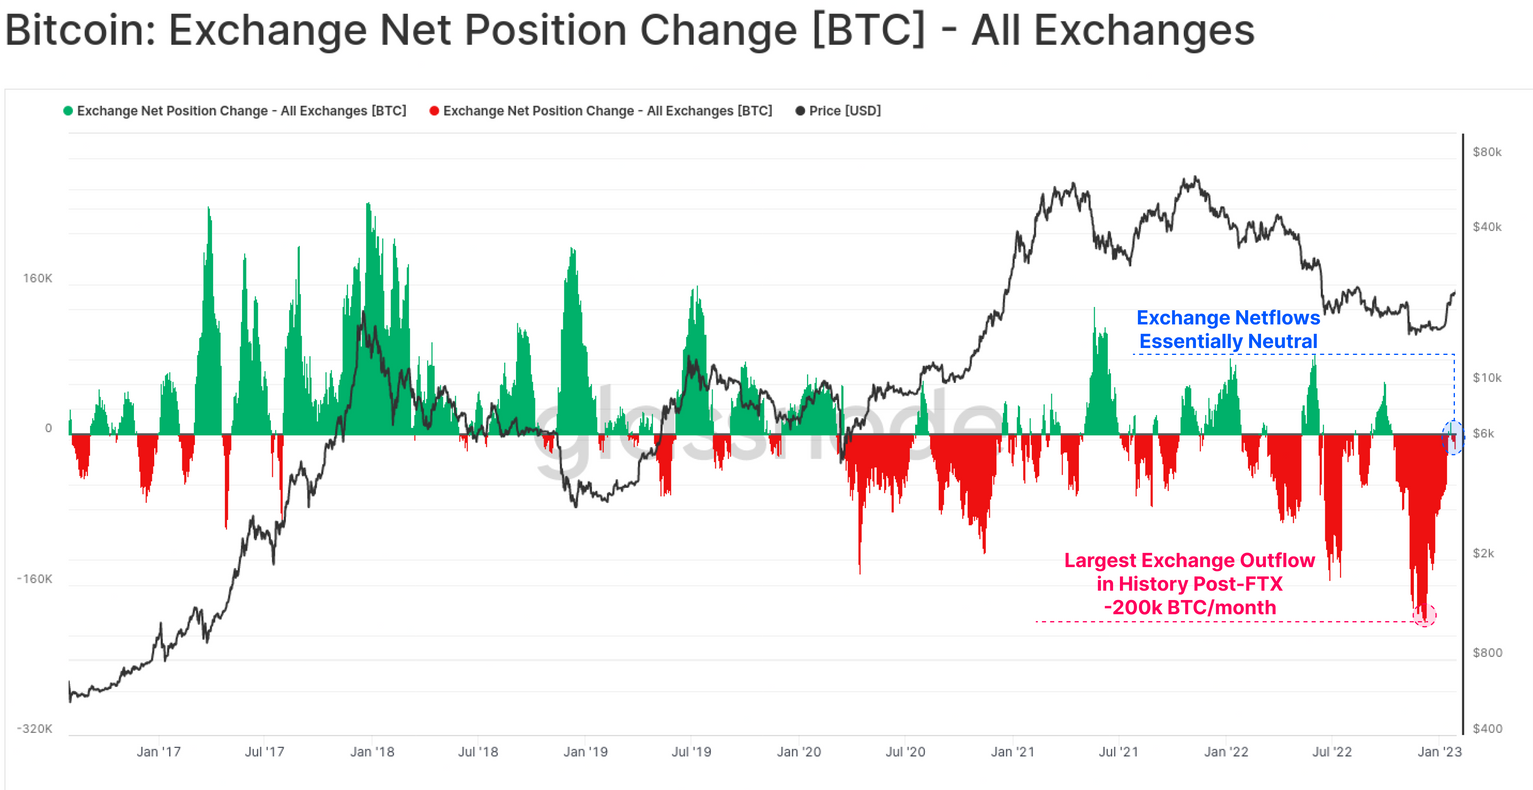 Bitcoin net position change on exchanges